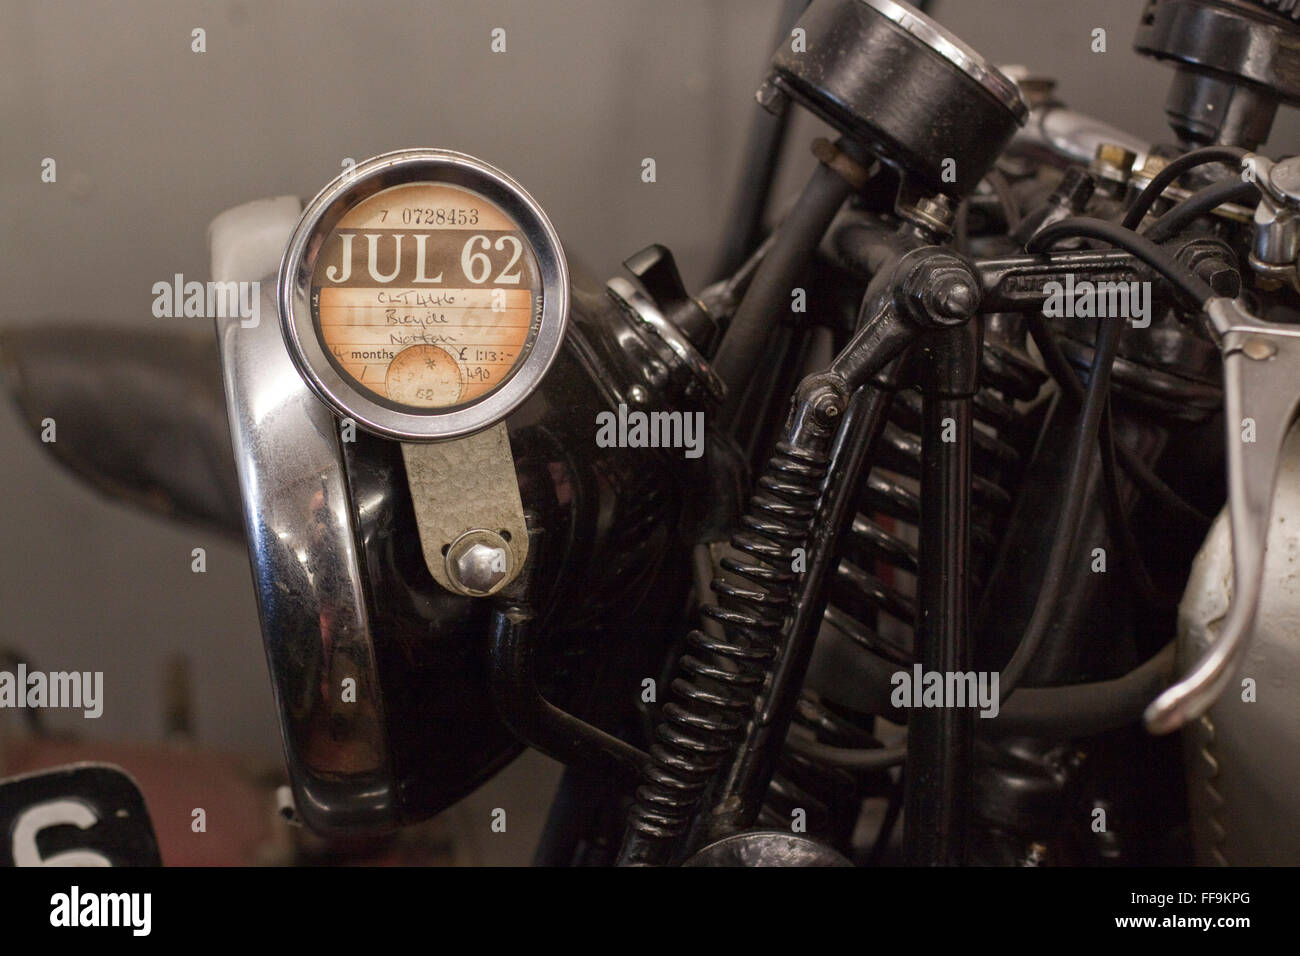 Road tax disc on a vintage motorcycle Stock Photo - Alamy